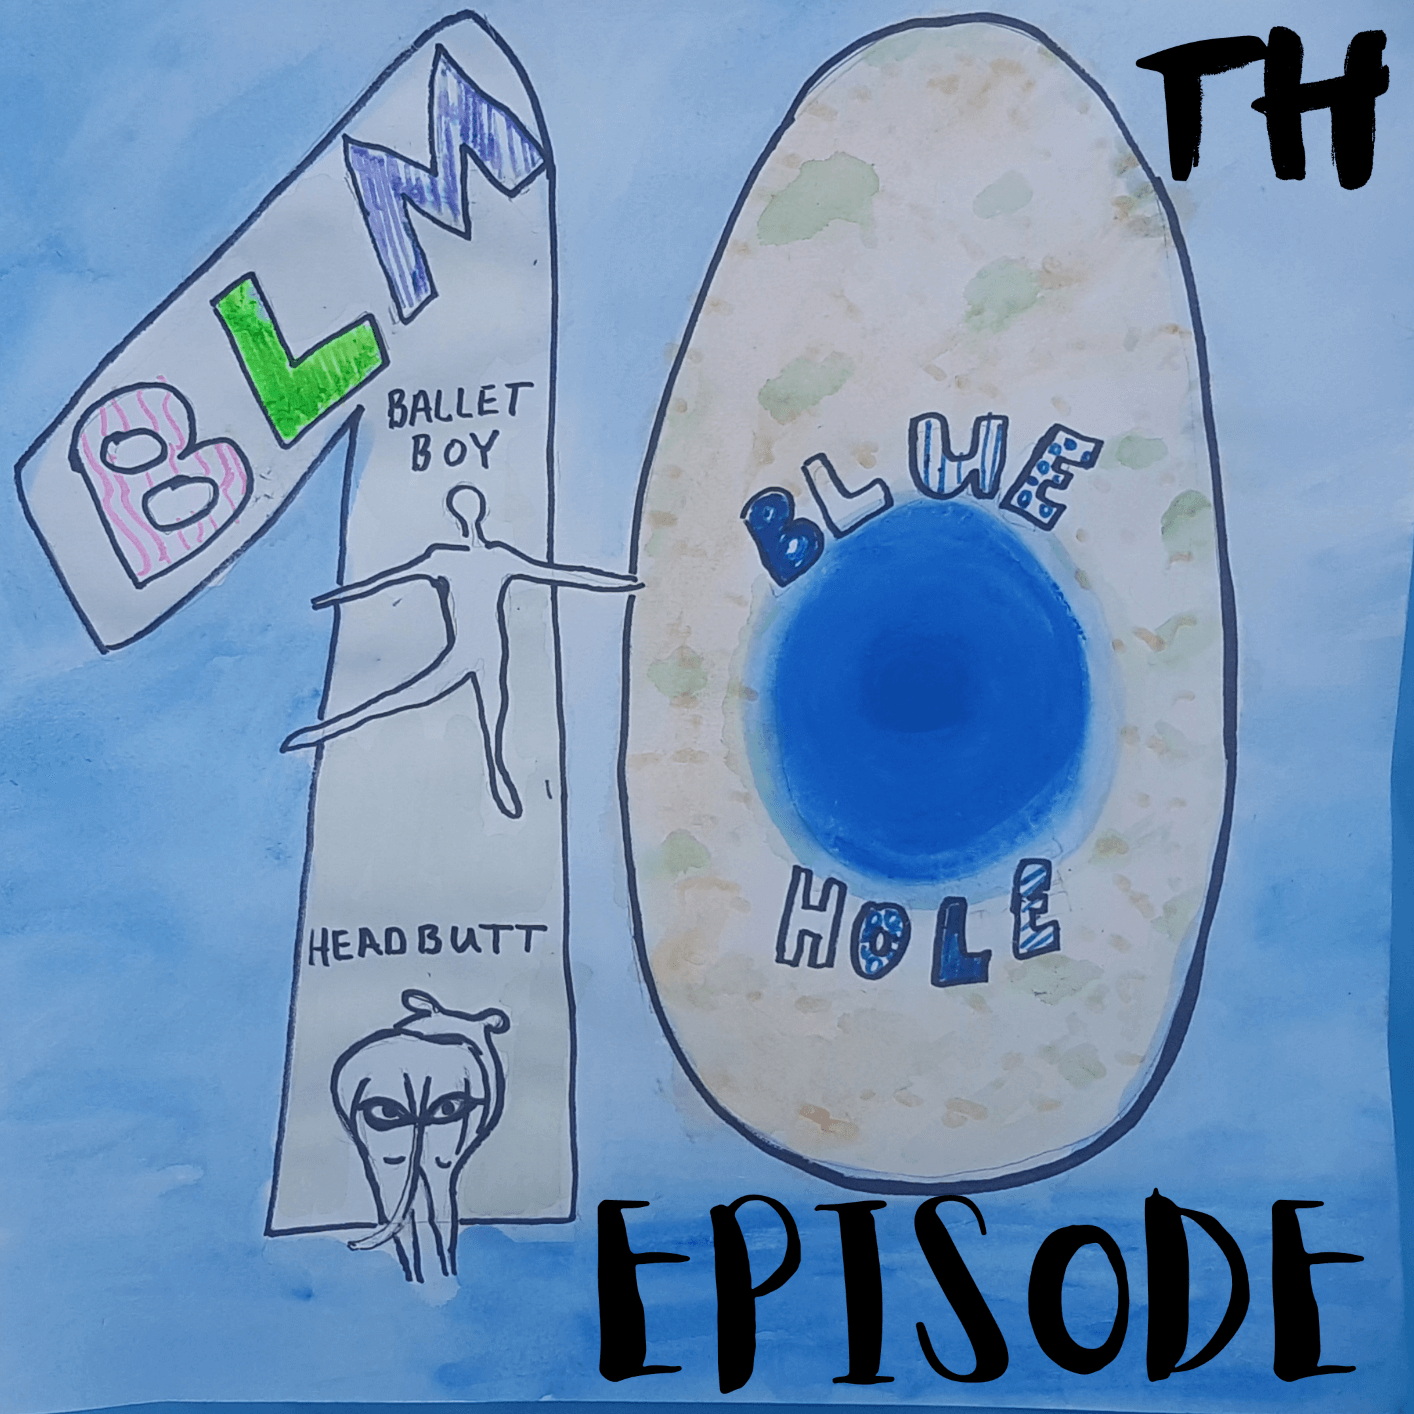 Episode 10 on US race tensions, mysterious blue holes at sea, Nigeria’s ballet boy and the anti-lion head butt